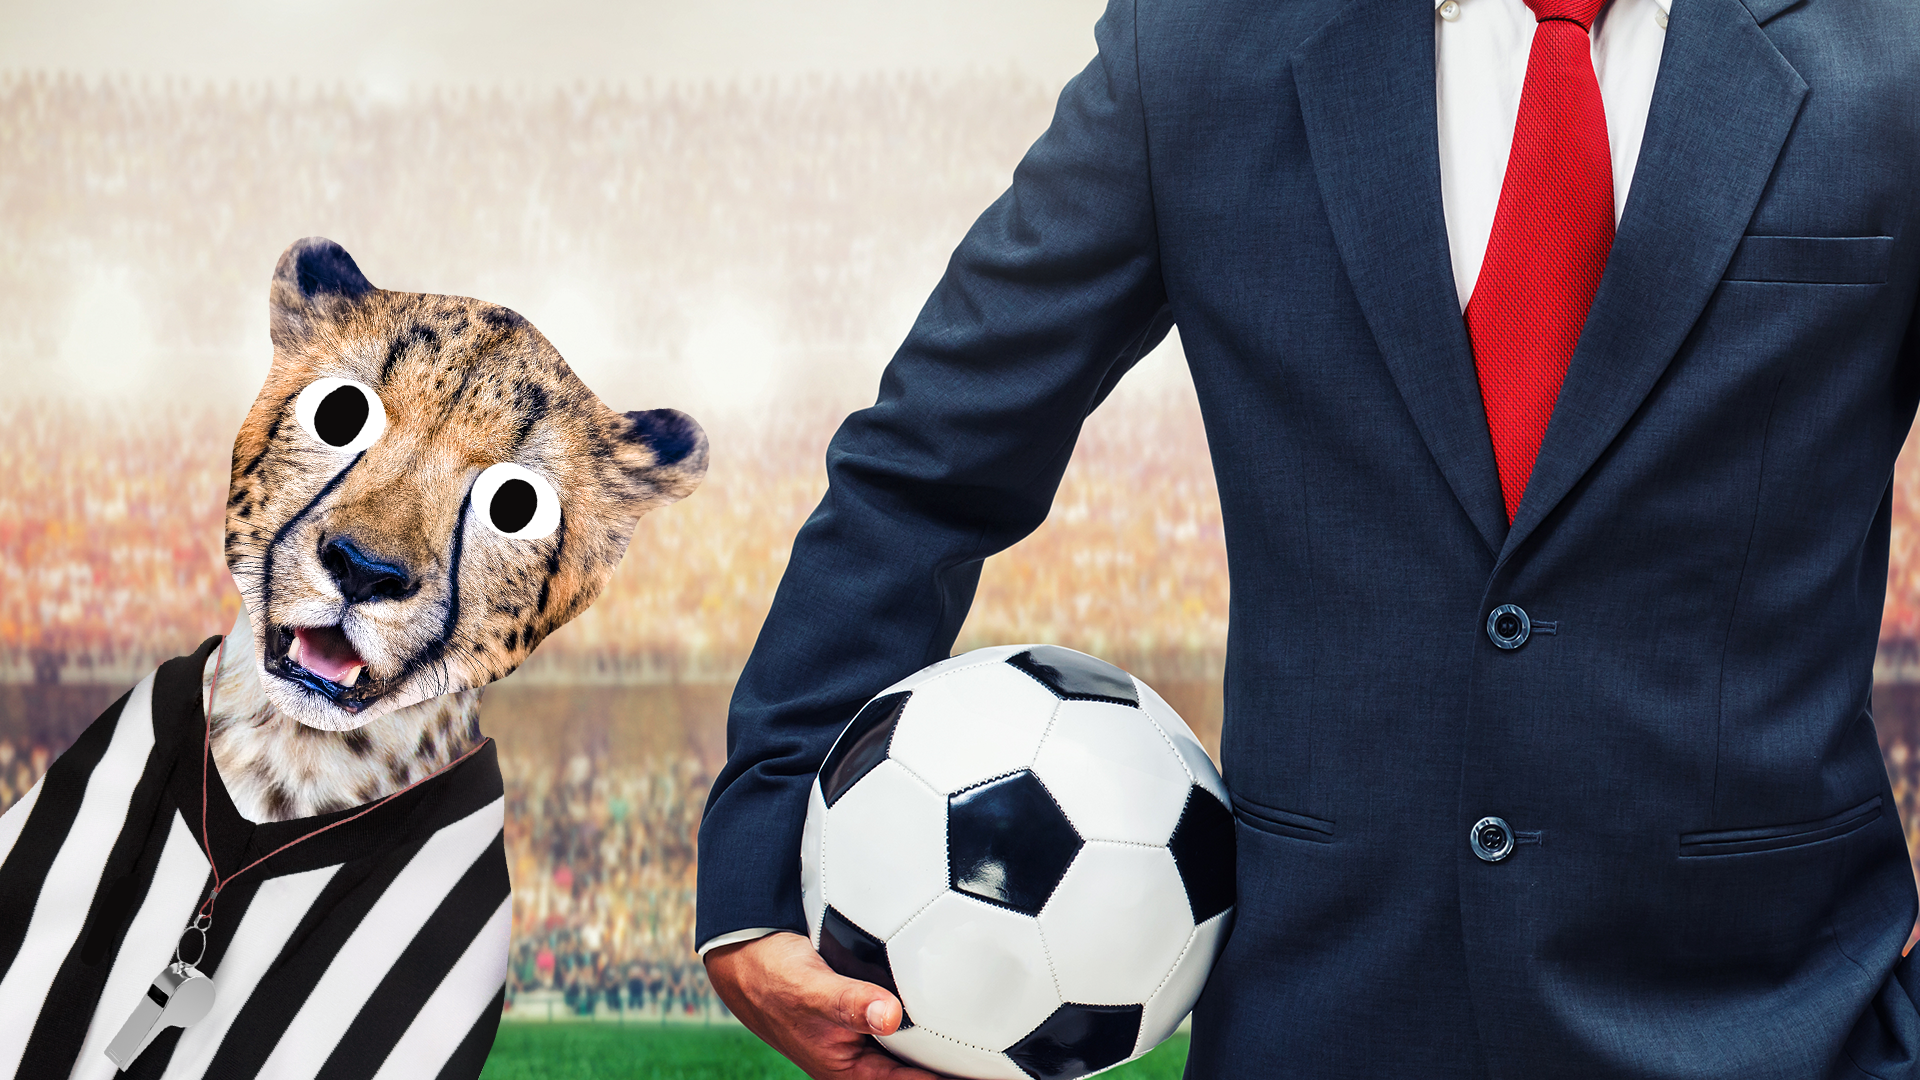 Man in suit with football and referee cheetah